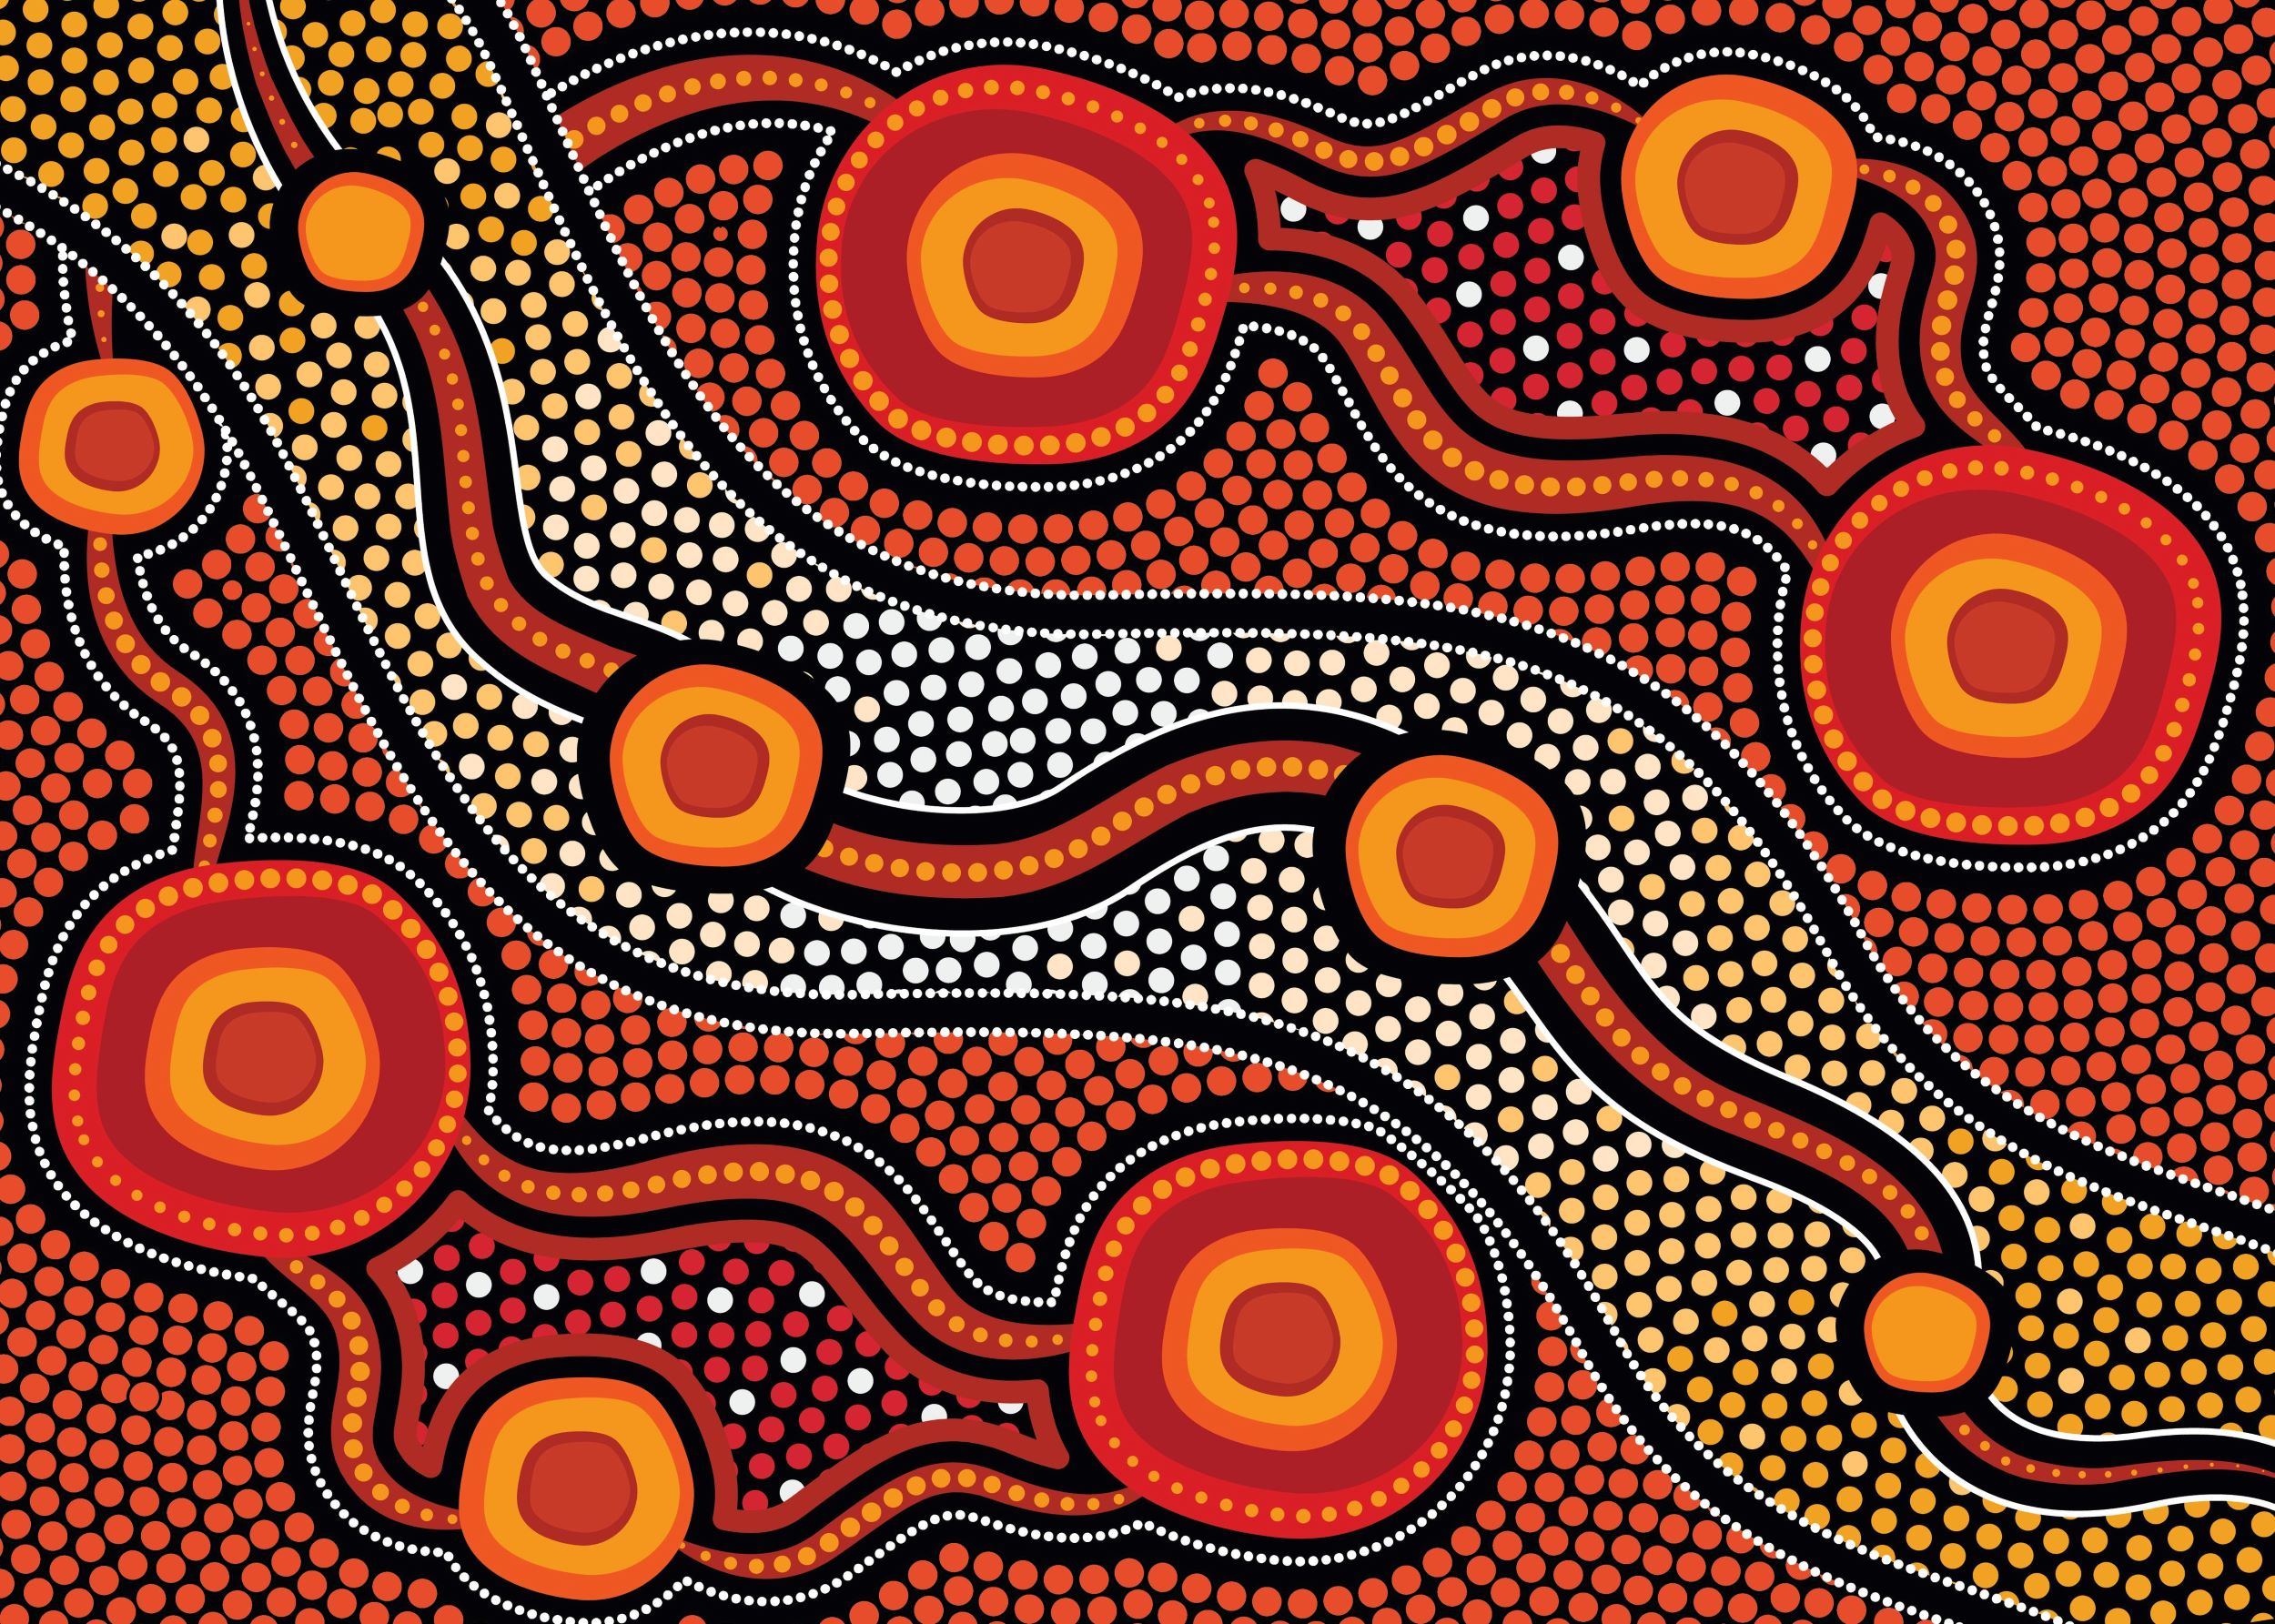 Traditional Australian Aboriginal artwork depicting river with circles and dots.